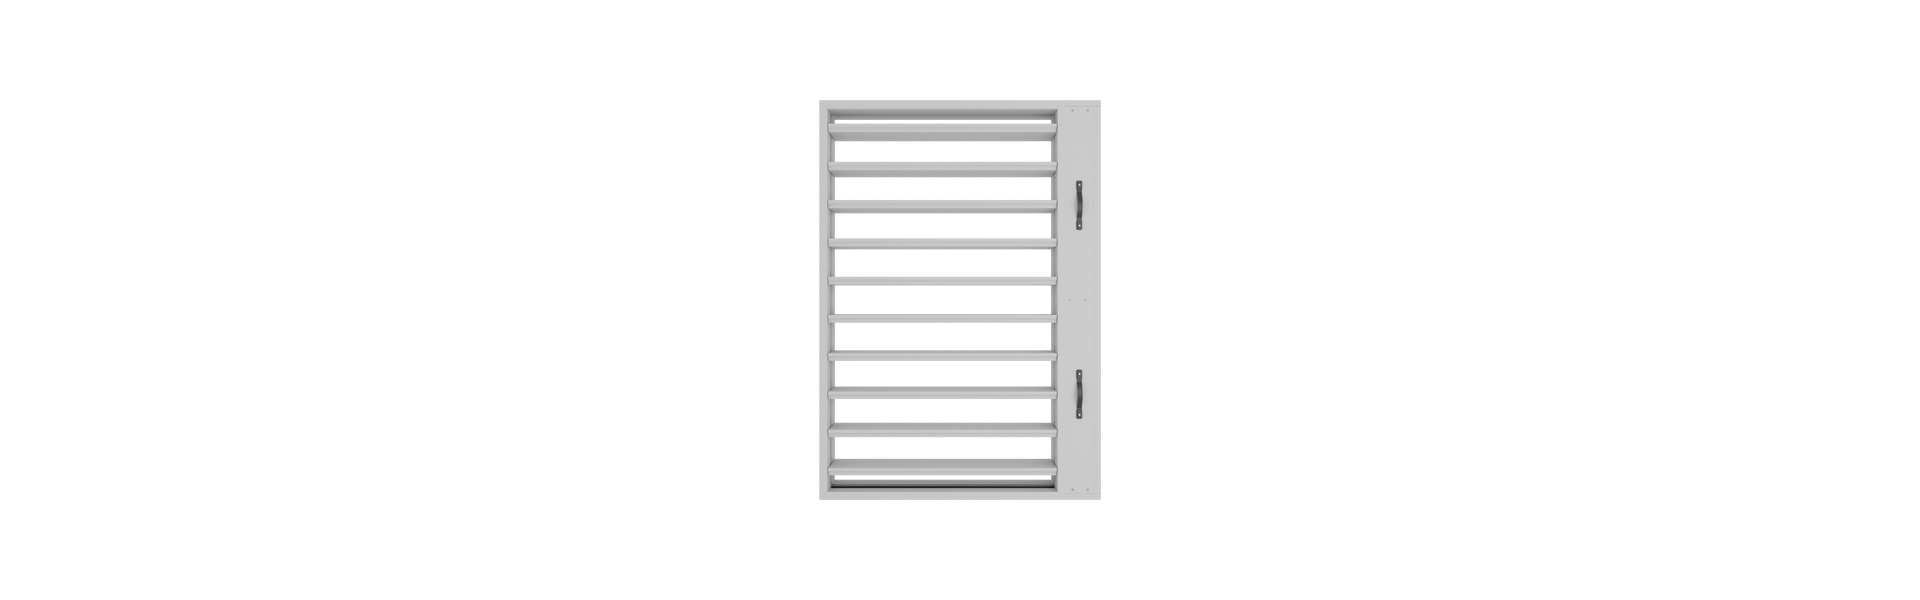 EKM90 multi-blade smoke control damper from the front